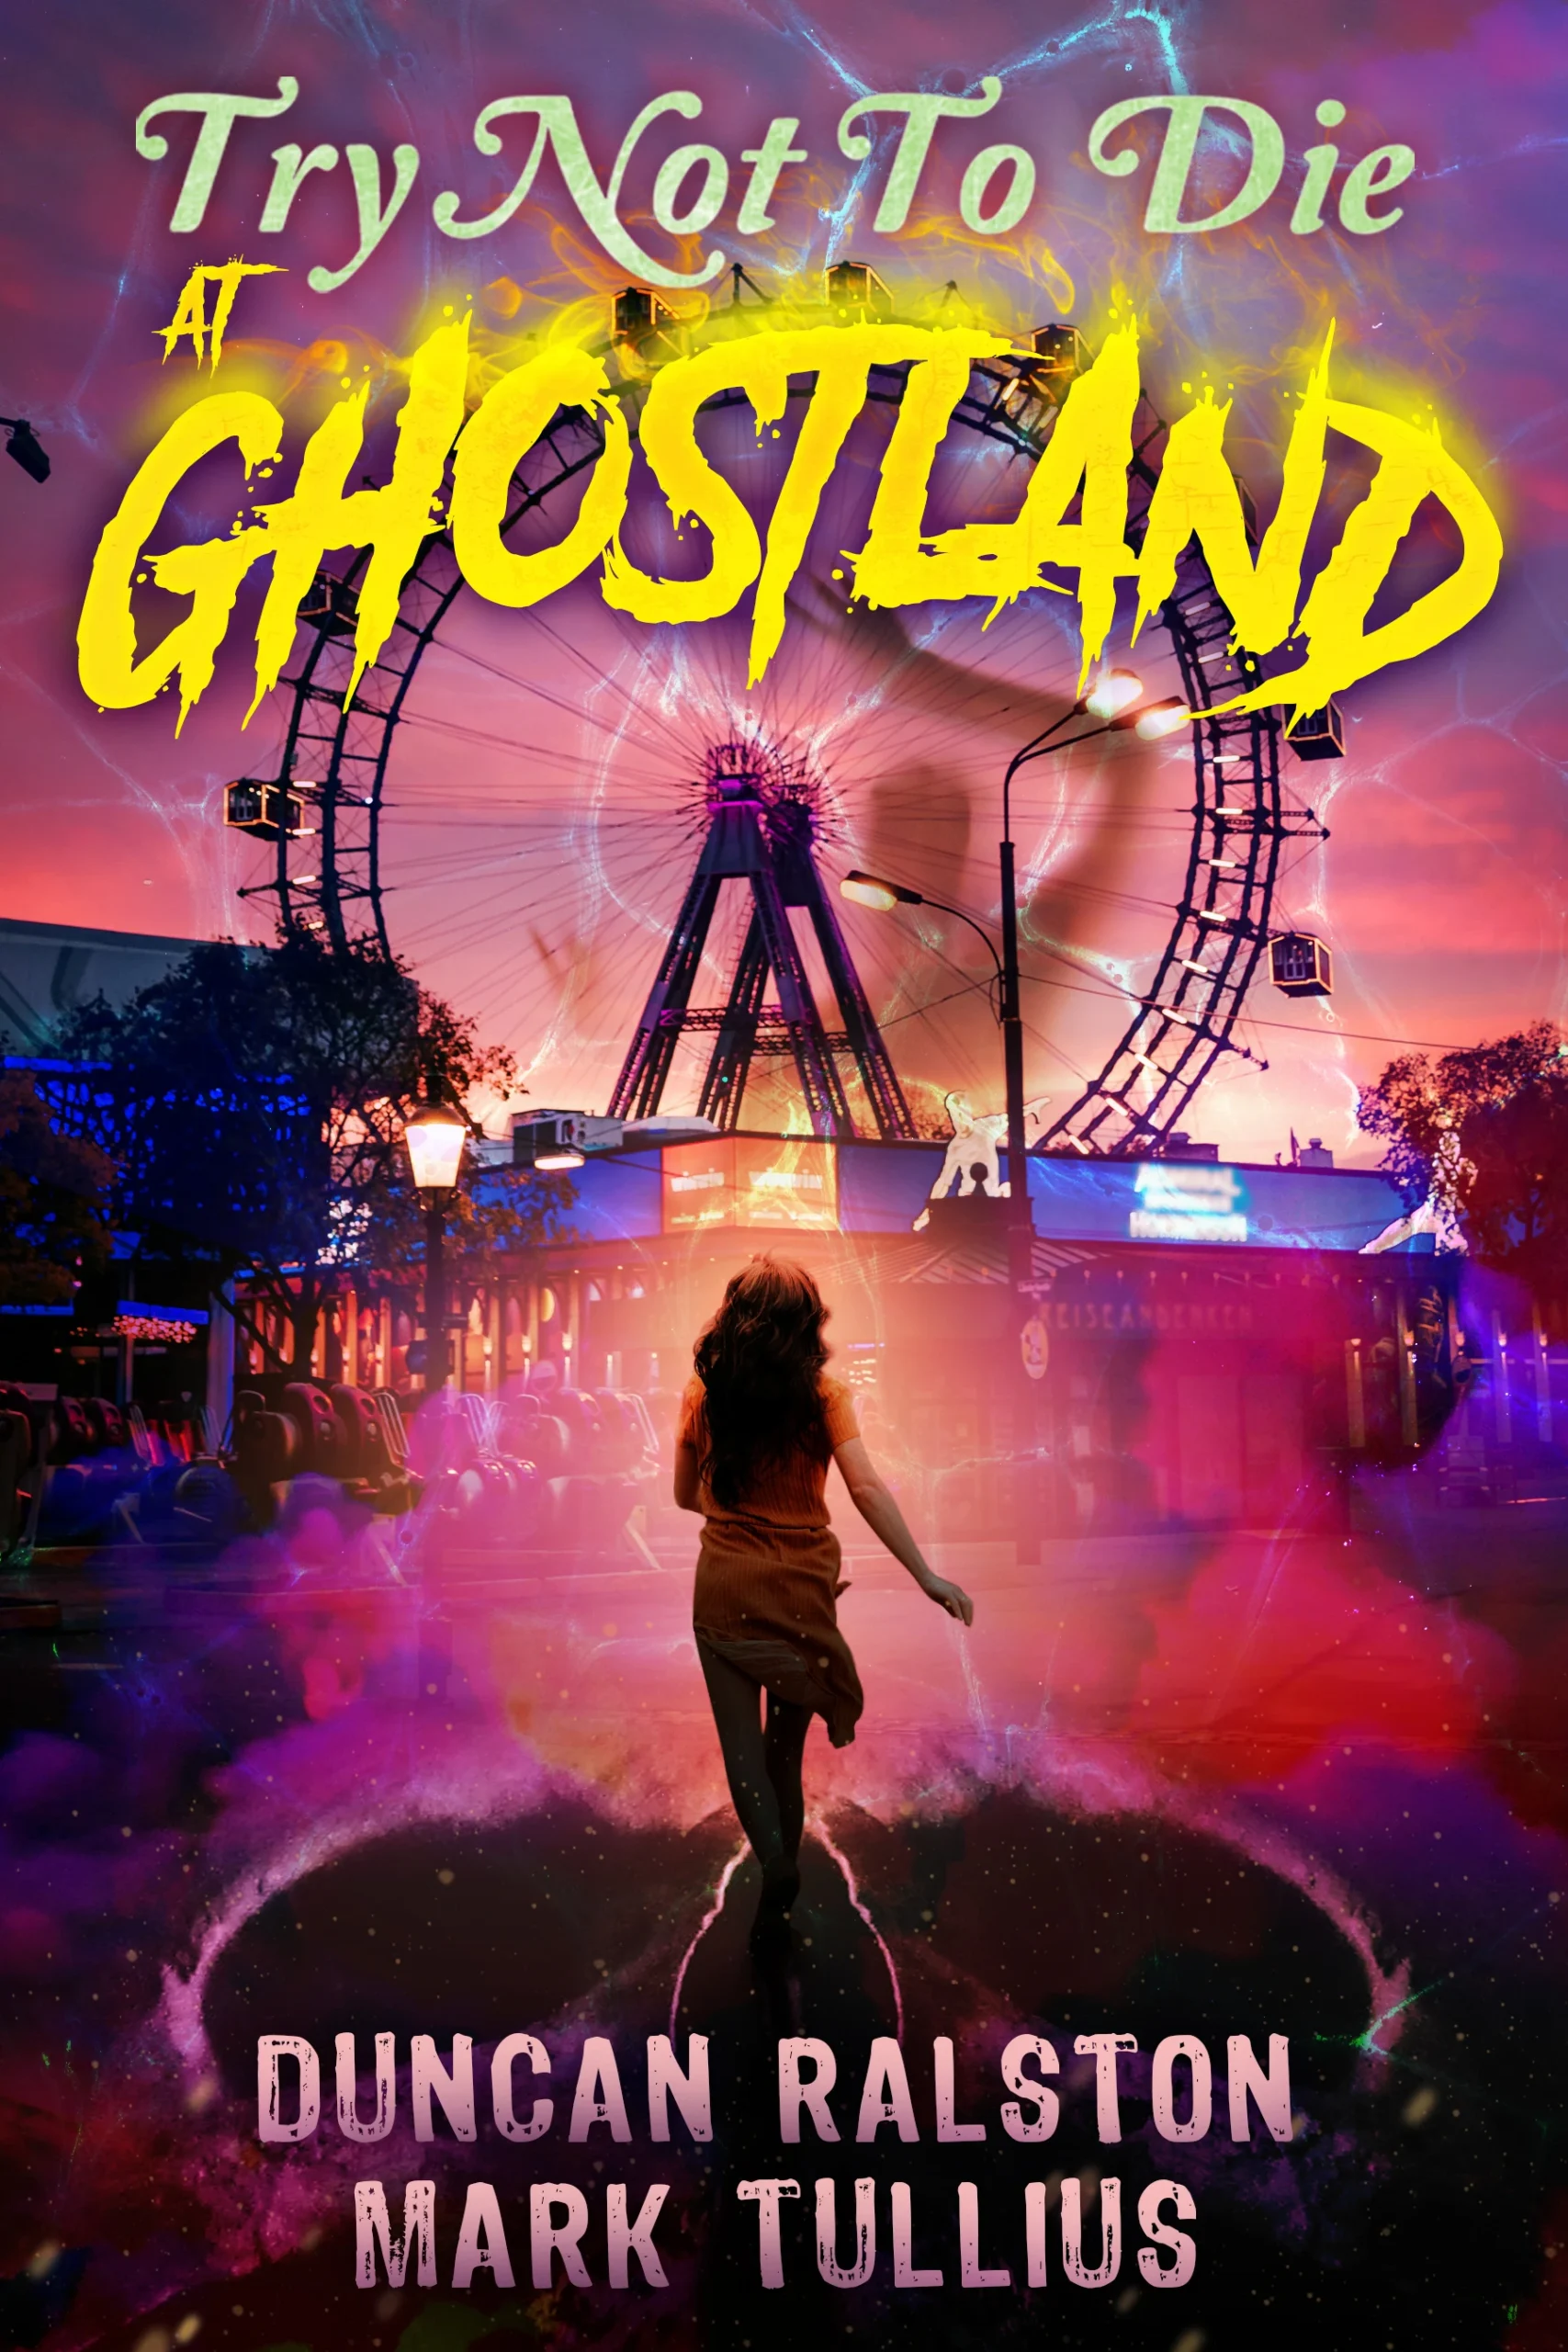 Try Not to Die At Ghostland scaled